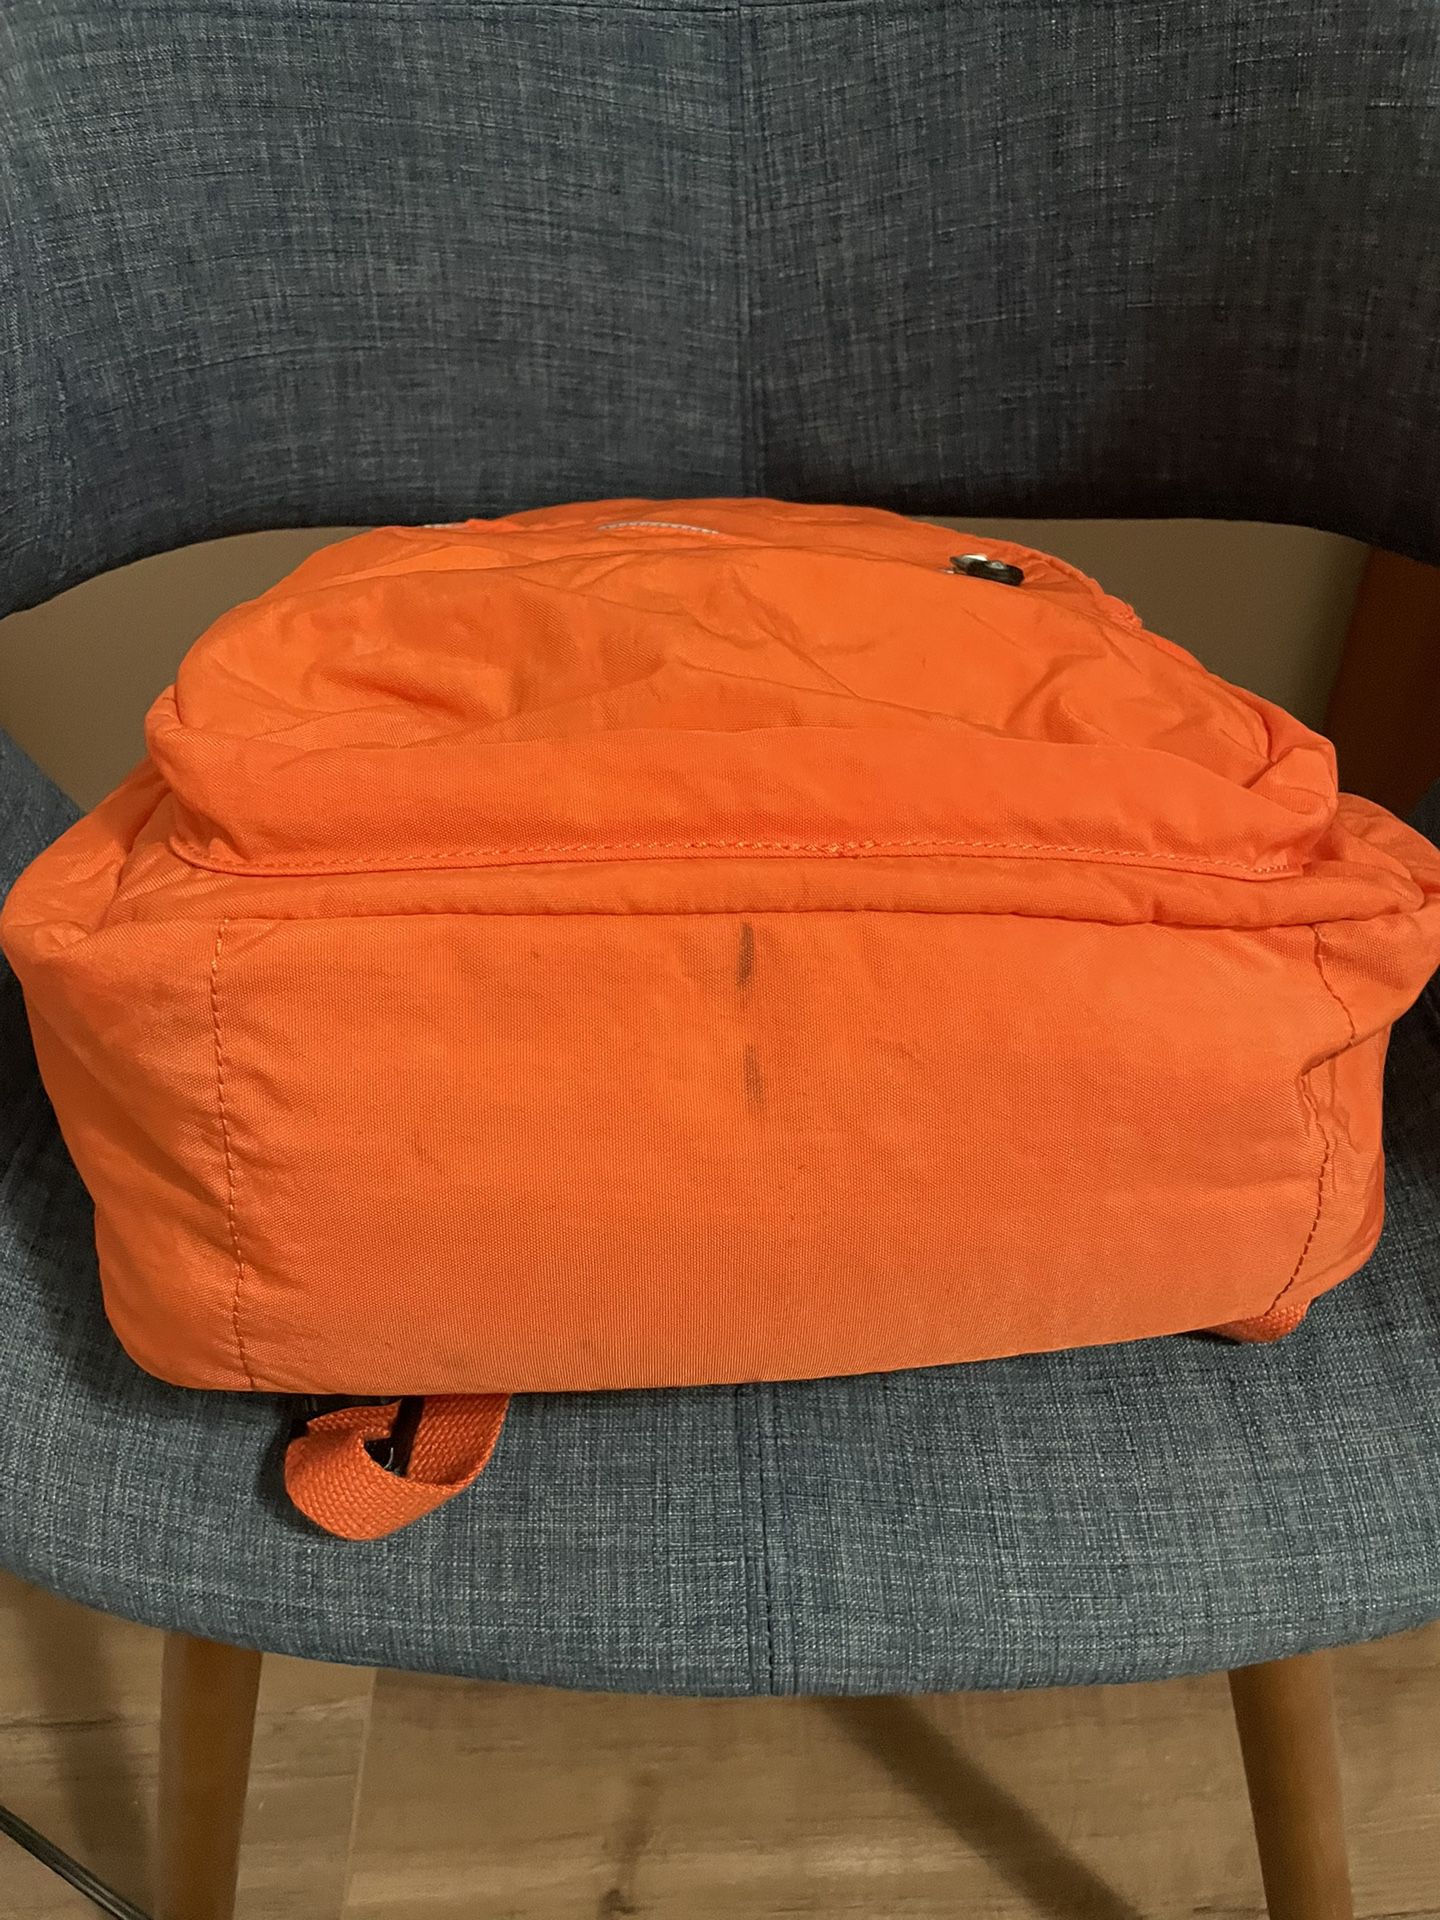 Kipling large Backpack with Laptop protection for Sale in Coral Springs, FL  - OfferUp